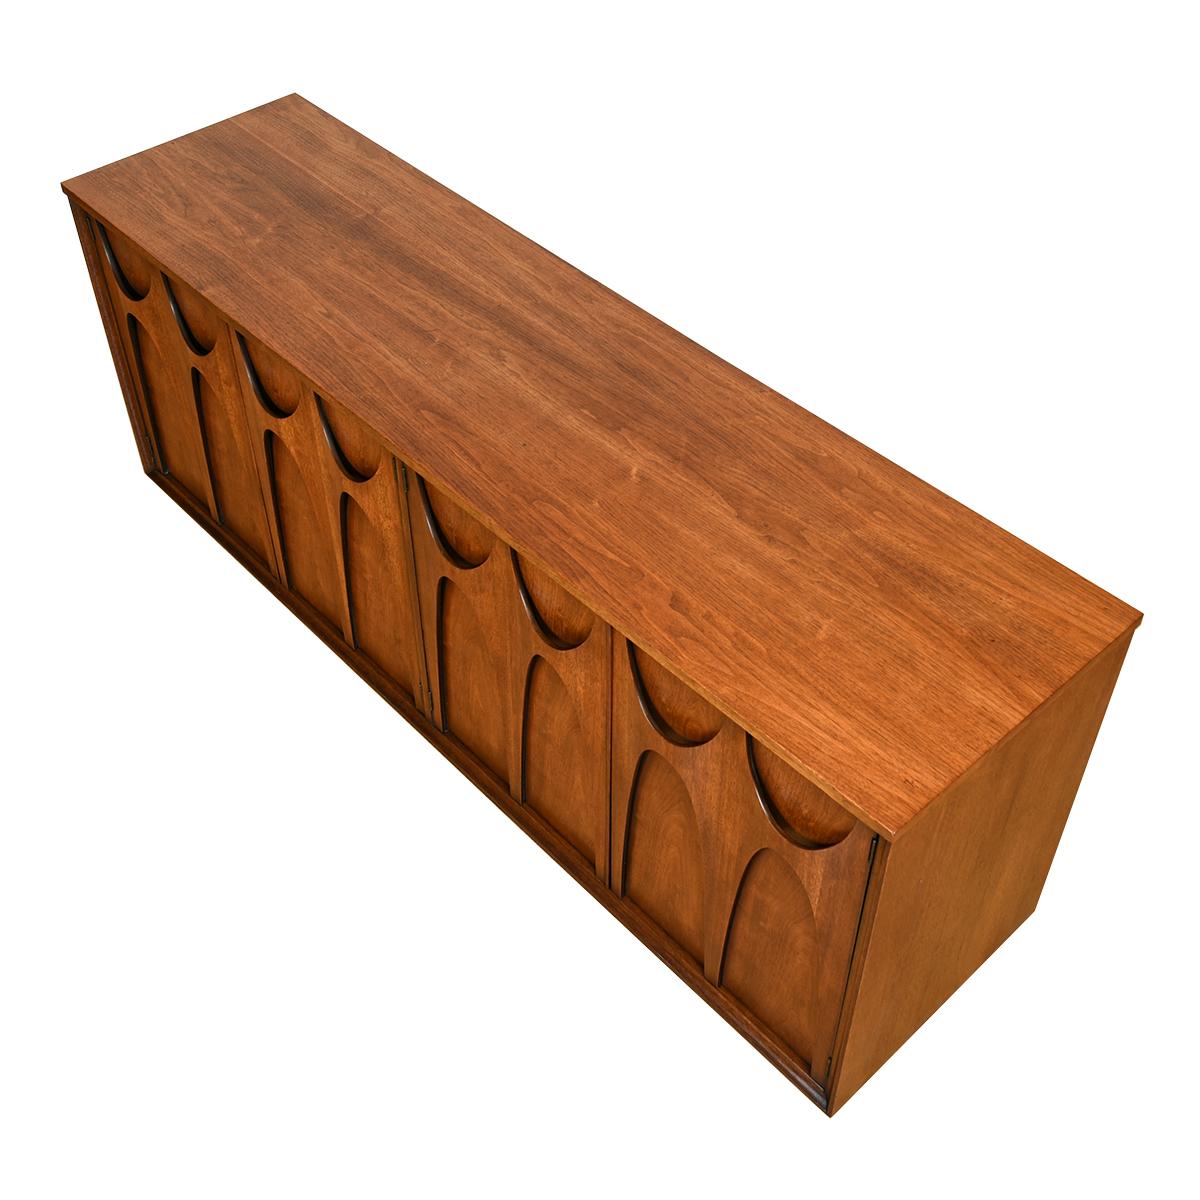 20th Century Coveted 4-Door Credenza Buffet in Walnut by Broyhill Brasilia